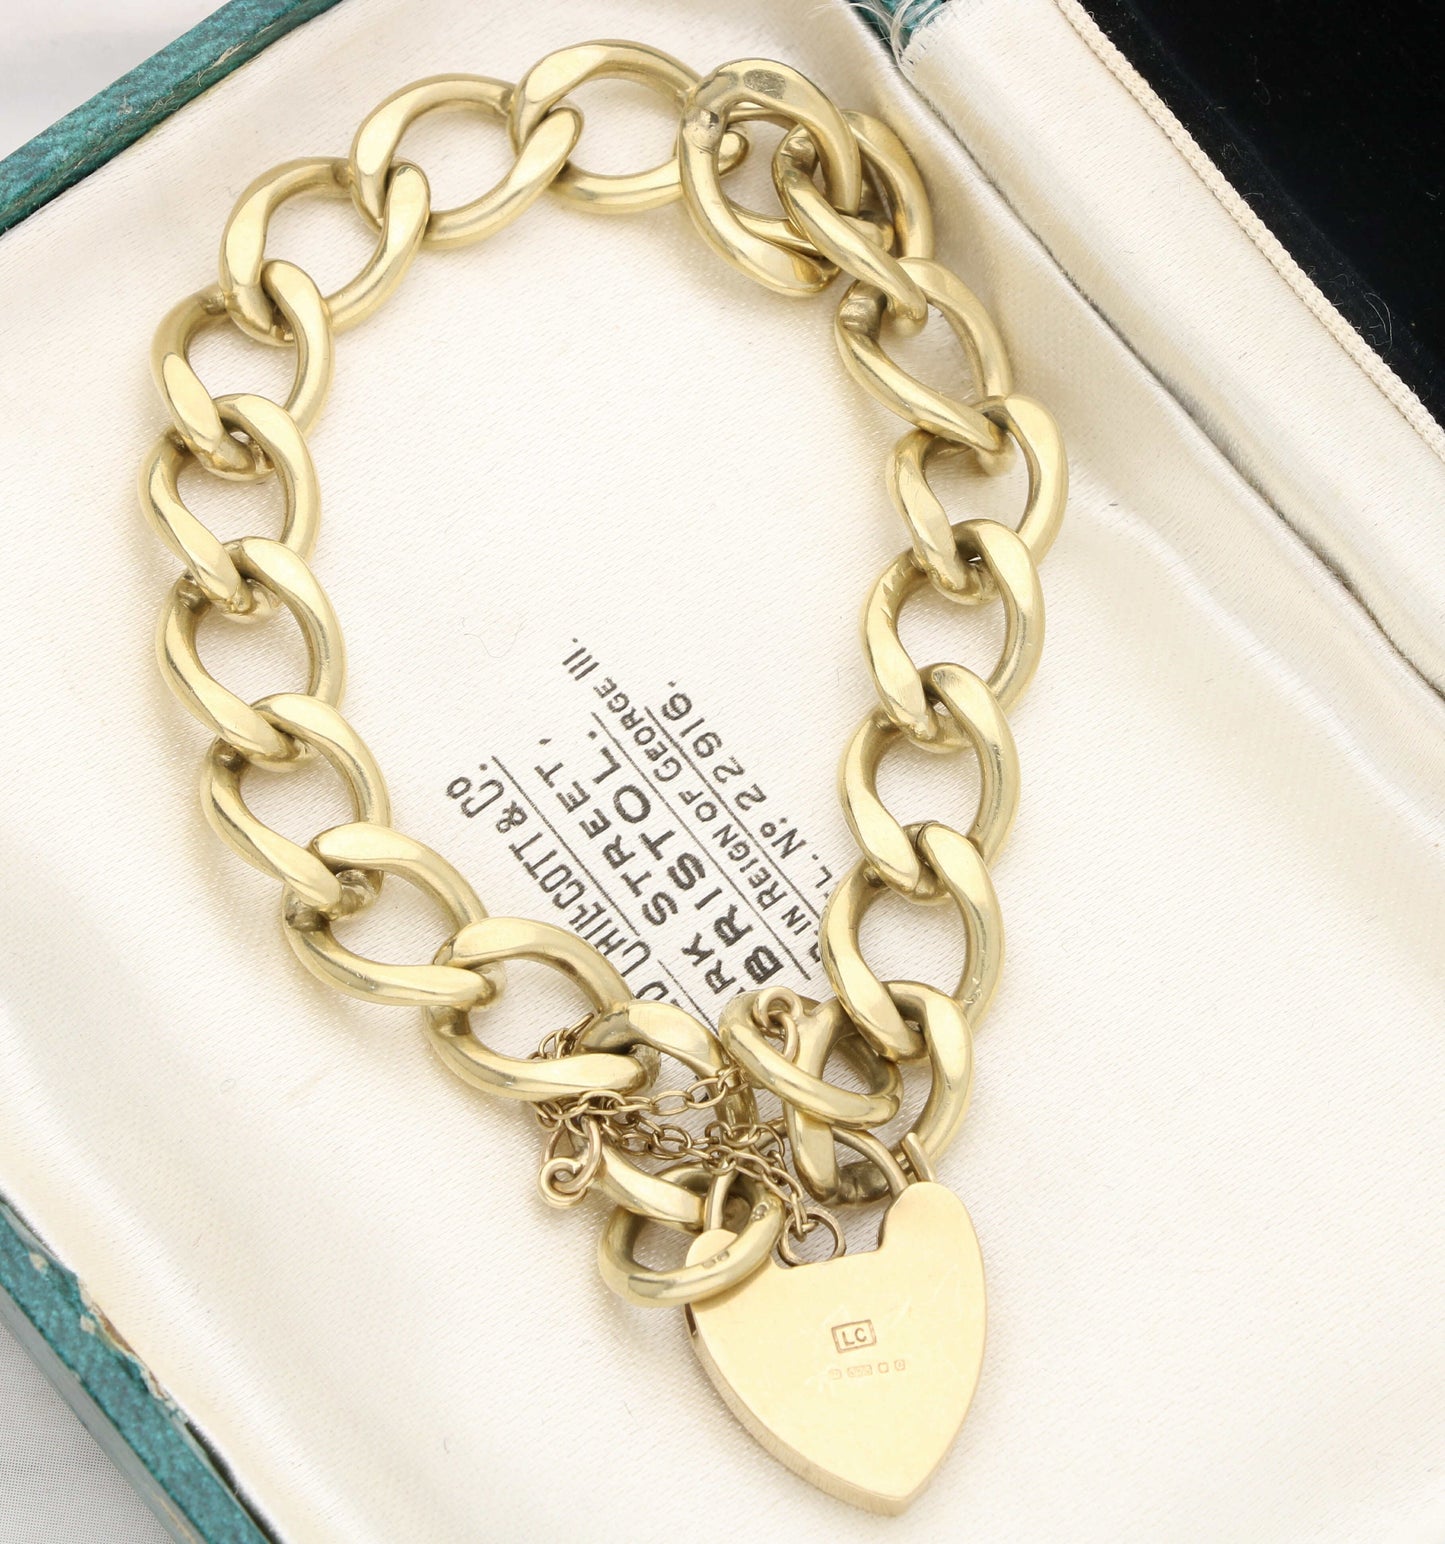 9ct gold curb bracelet with heart padlock.